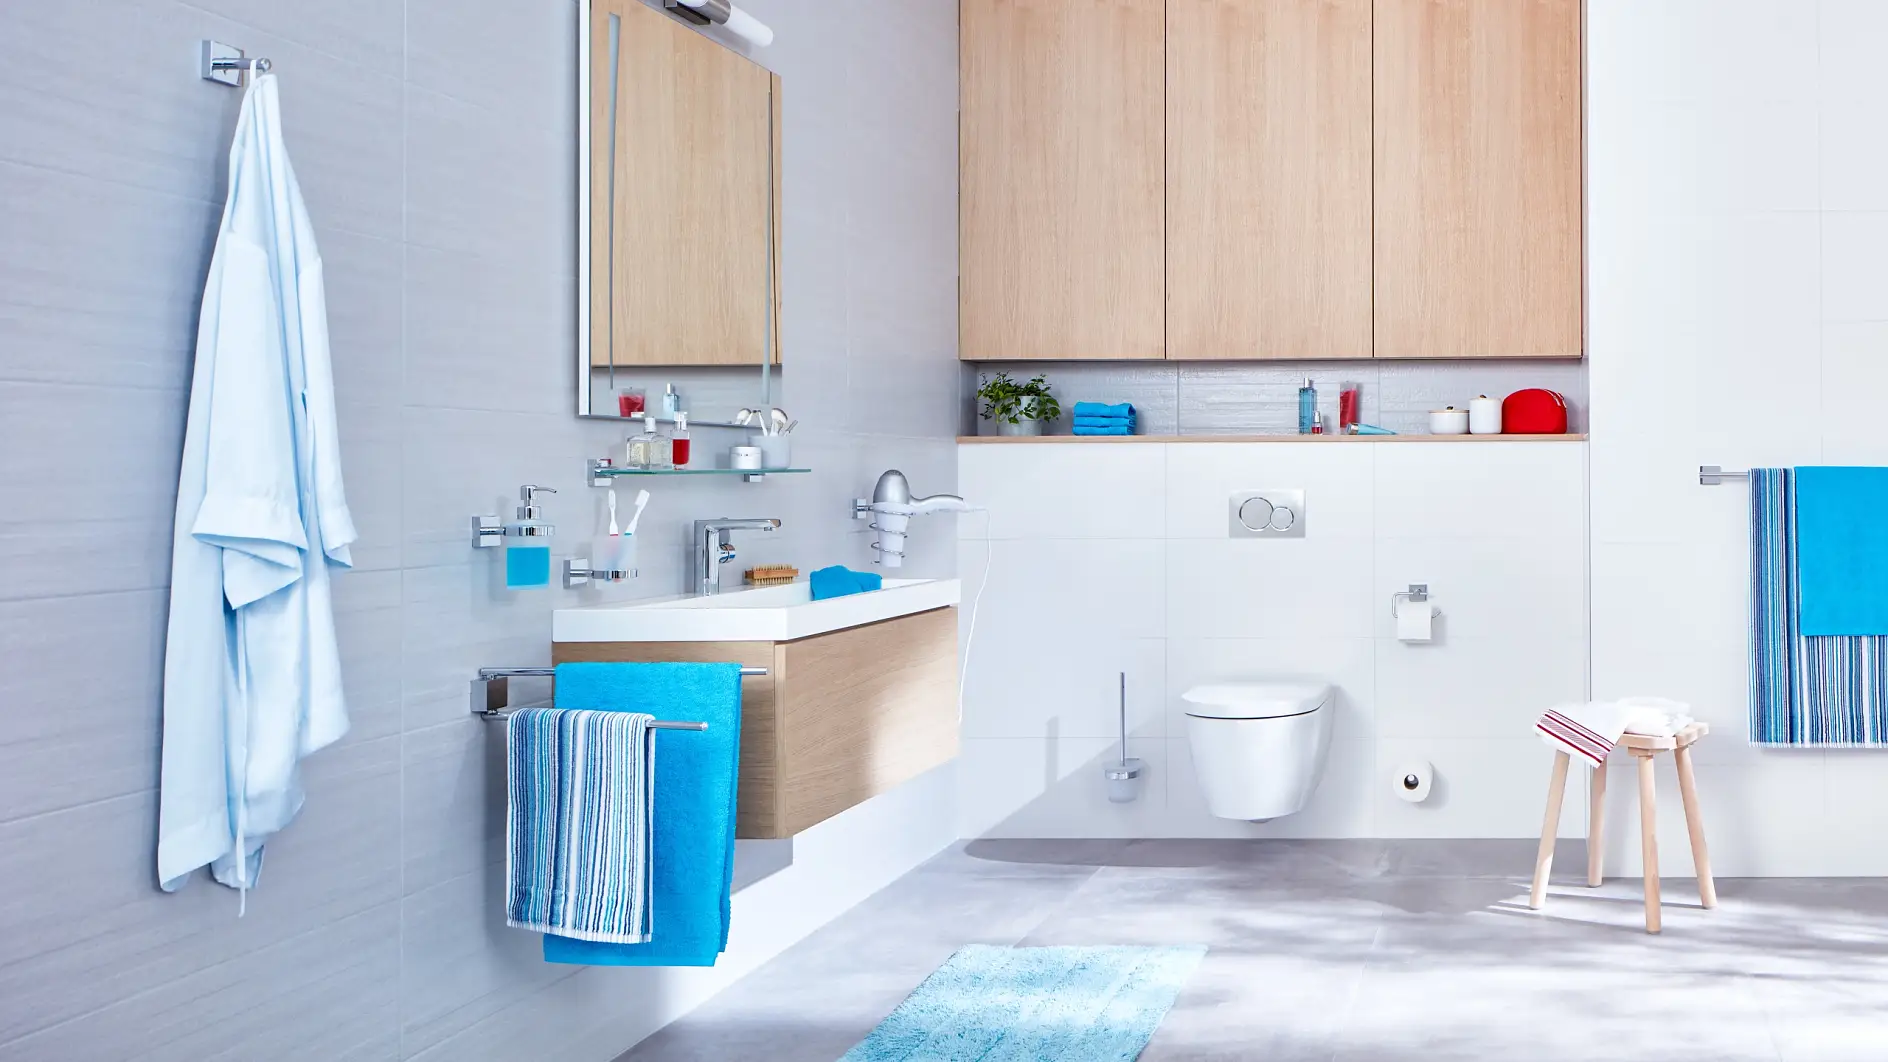 Clear design and straight structures for an organized bathroom experience.